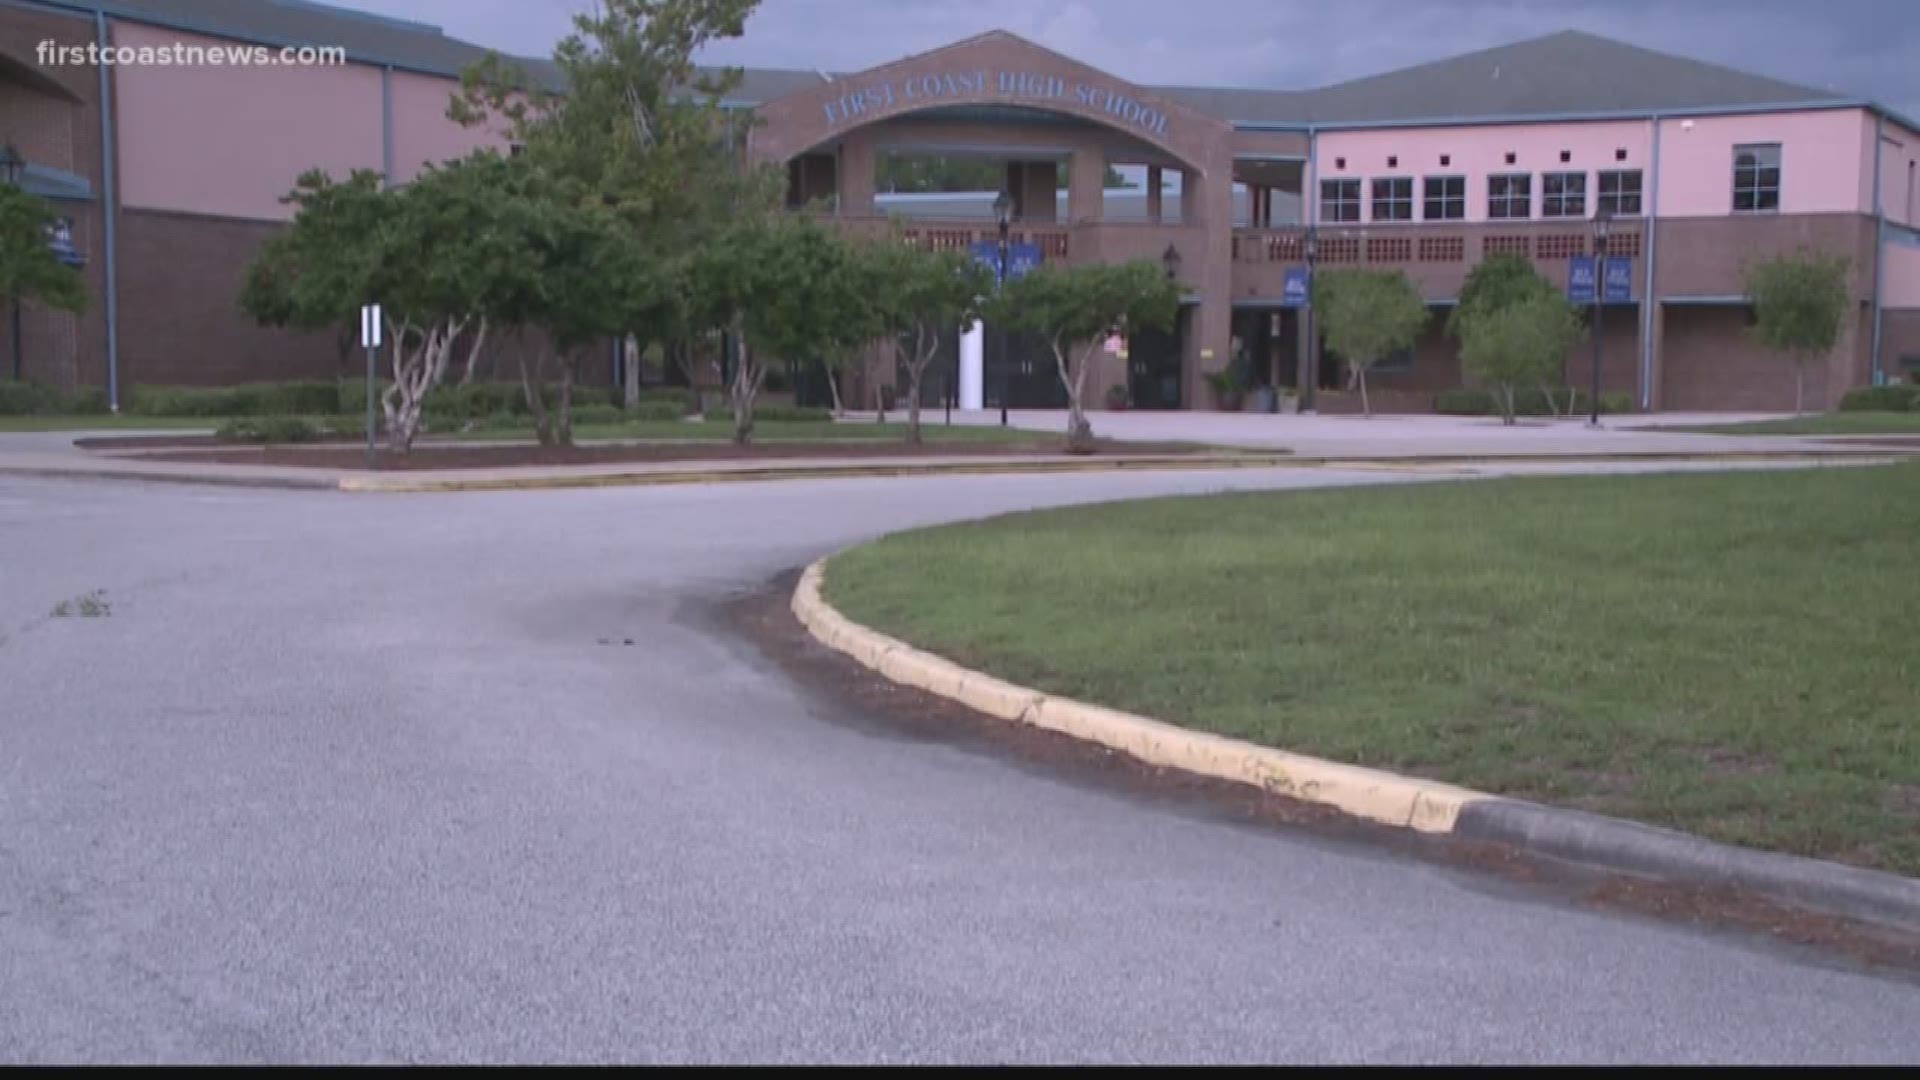 Two paraprofessionals with the Pride program at First Coast High School are being investigated.